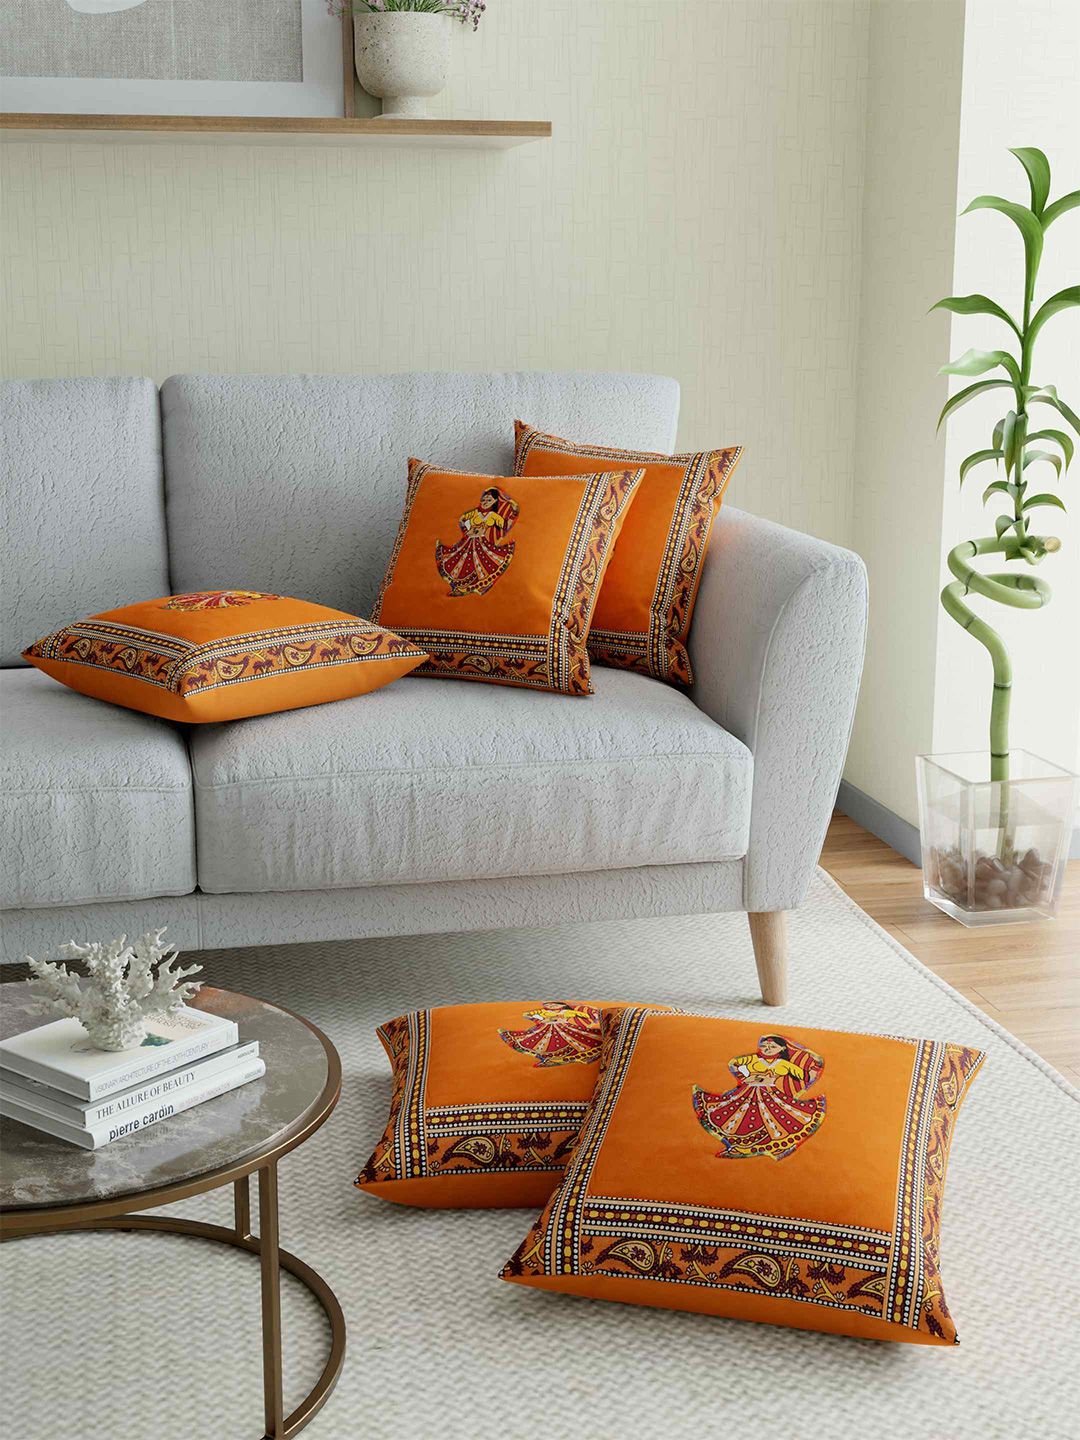 JAIPUR FABRIC Mustard & White Applique Ethnic Motifs Square Cushion Covers Set of 5 Price in India